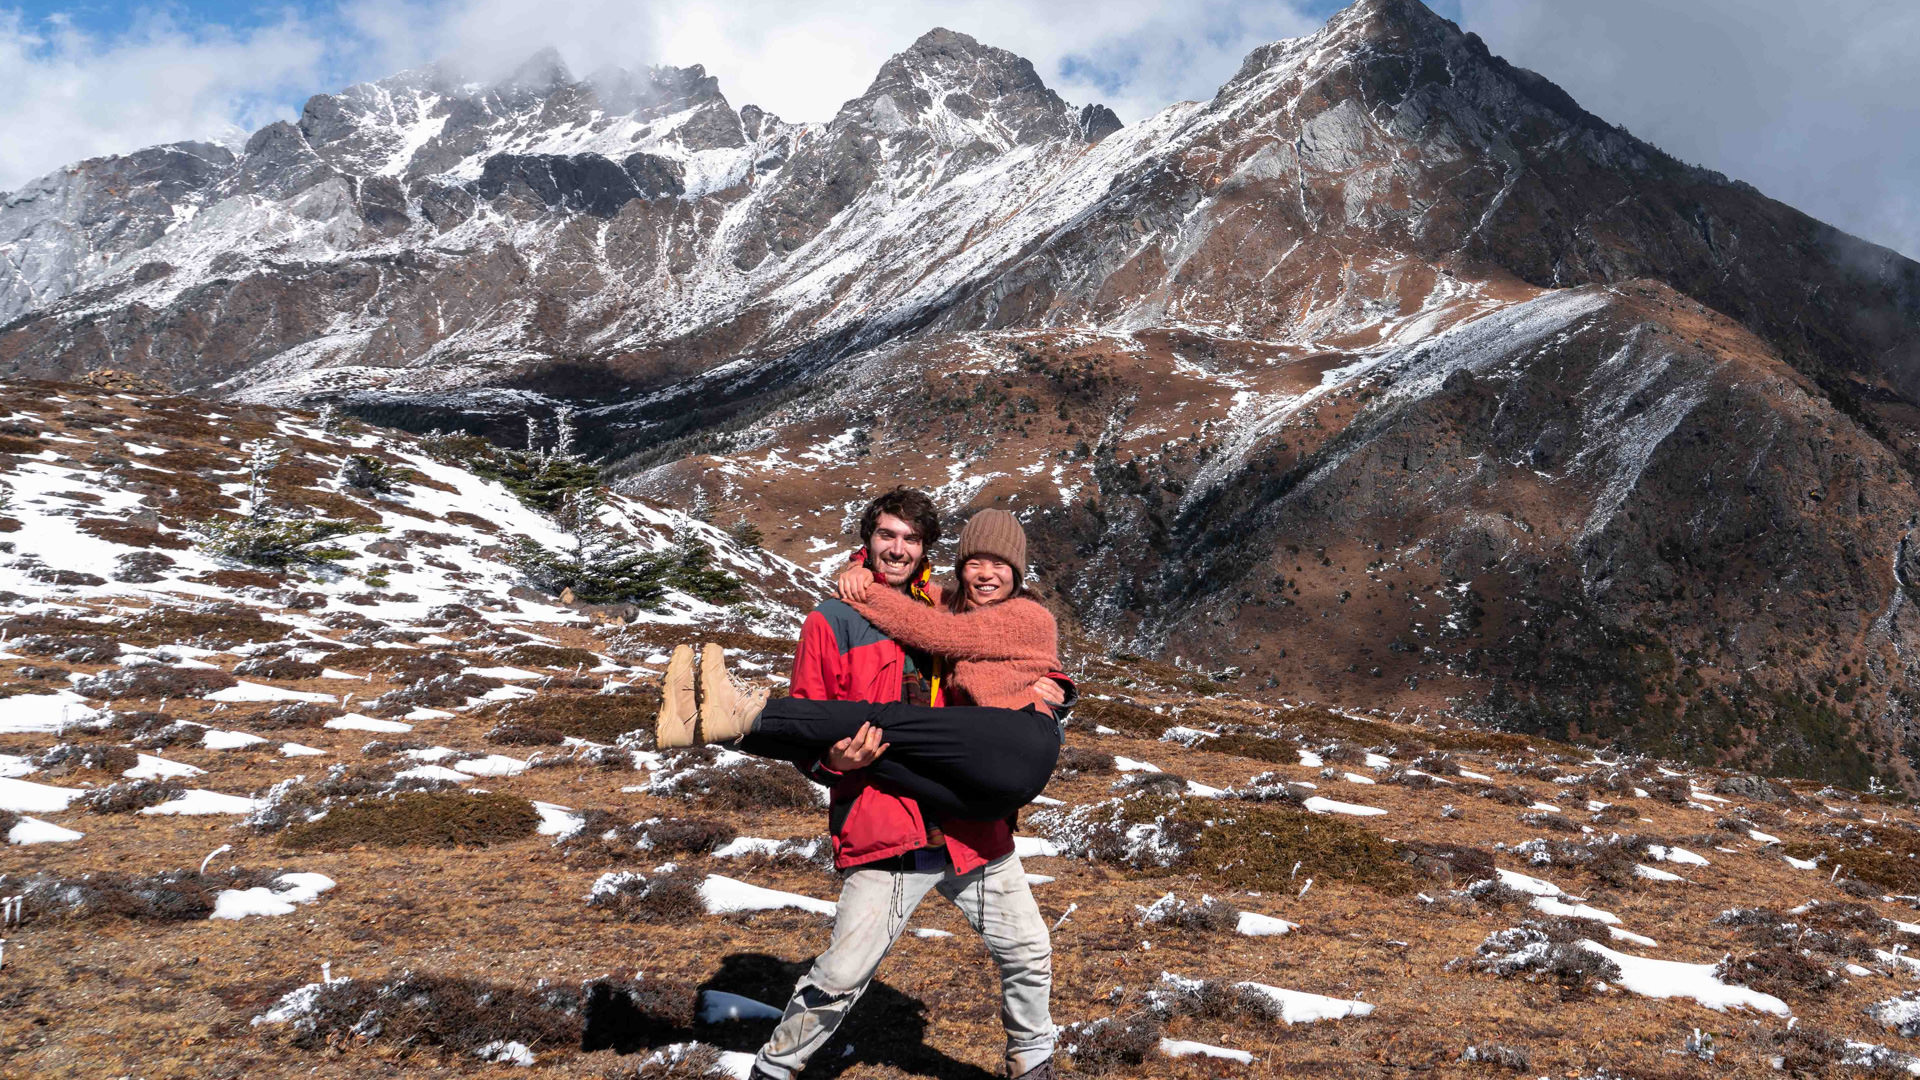 Scott lifts Ella from the ground with the snow-covered peaks of Jade Dragon mountain behind